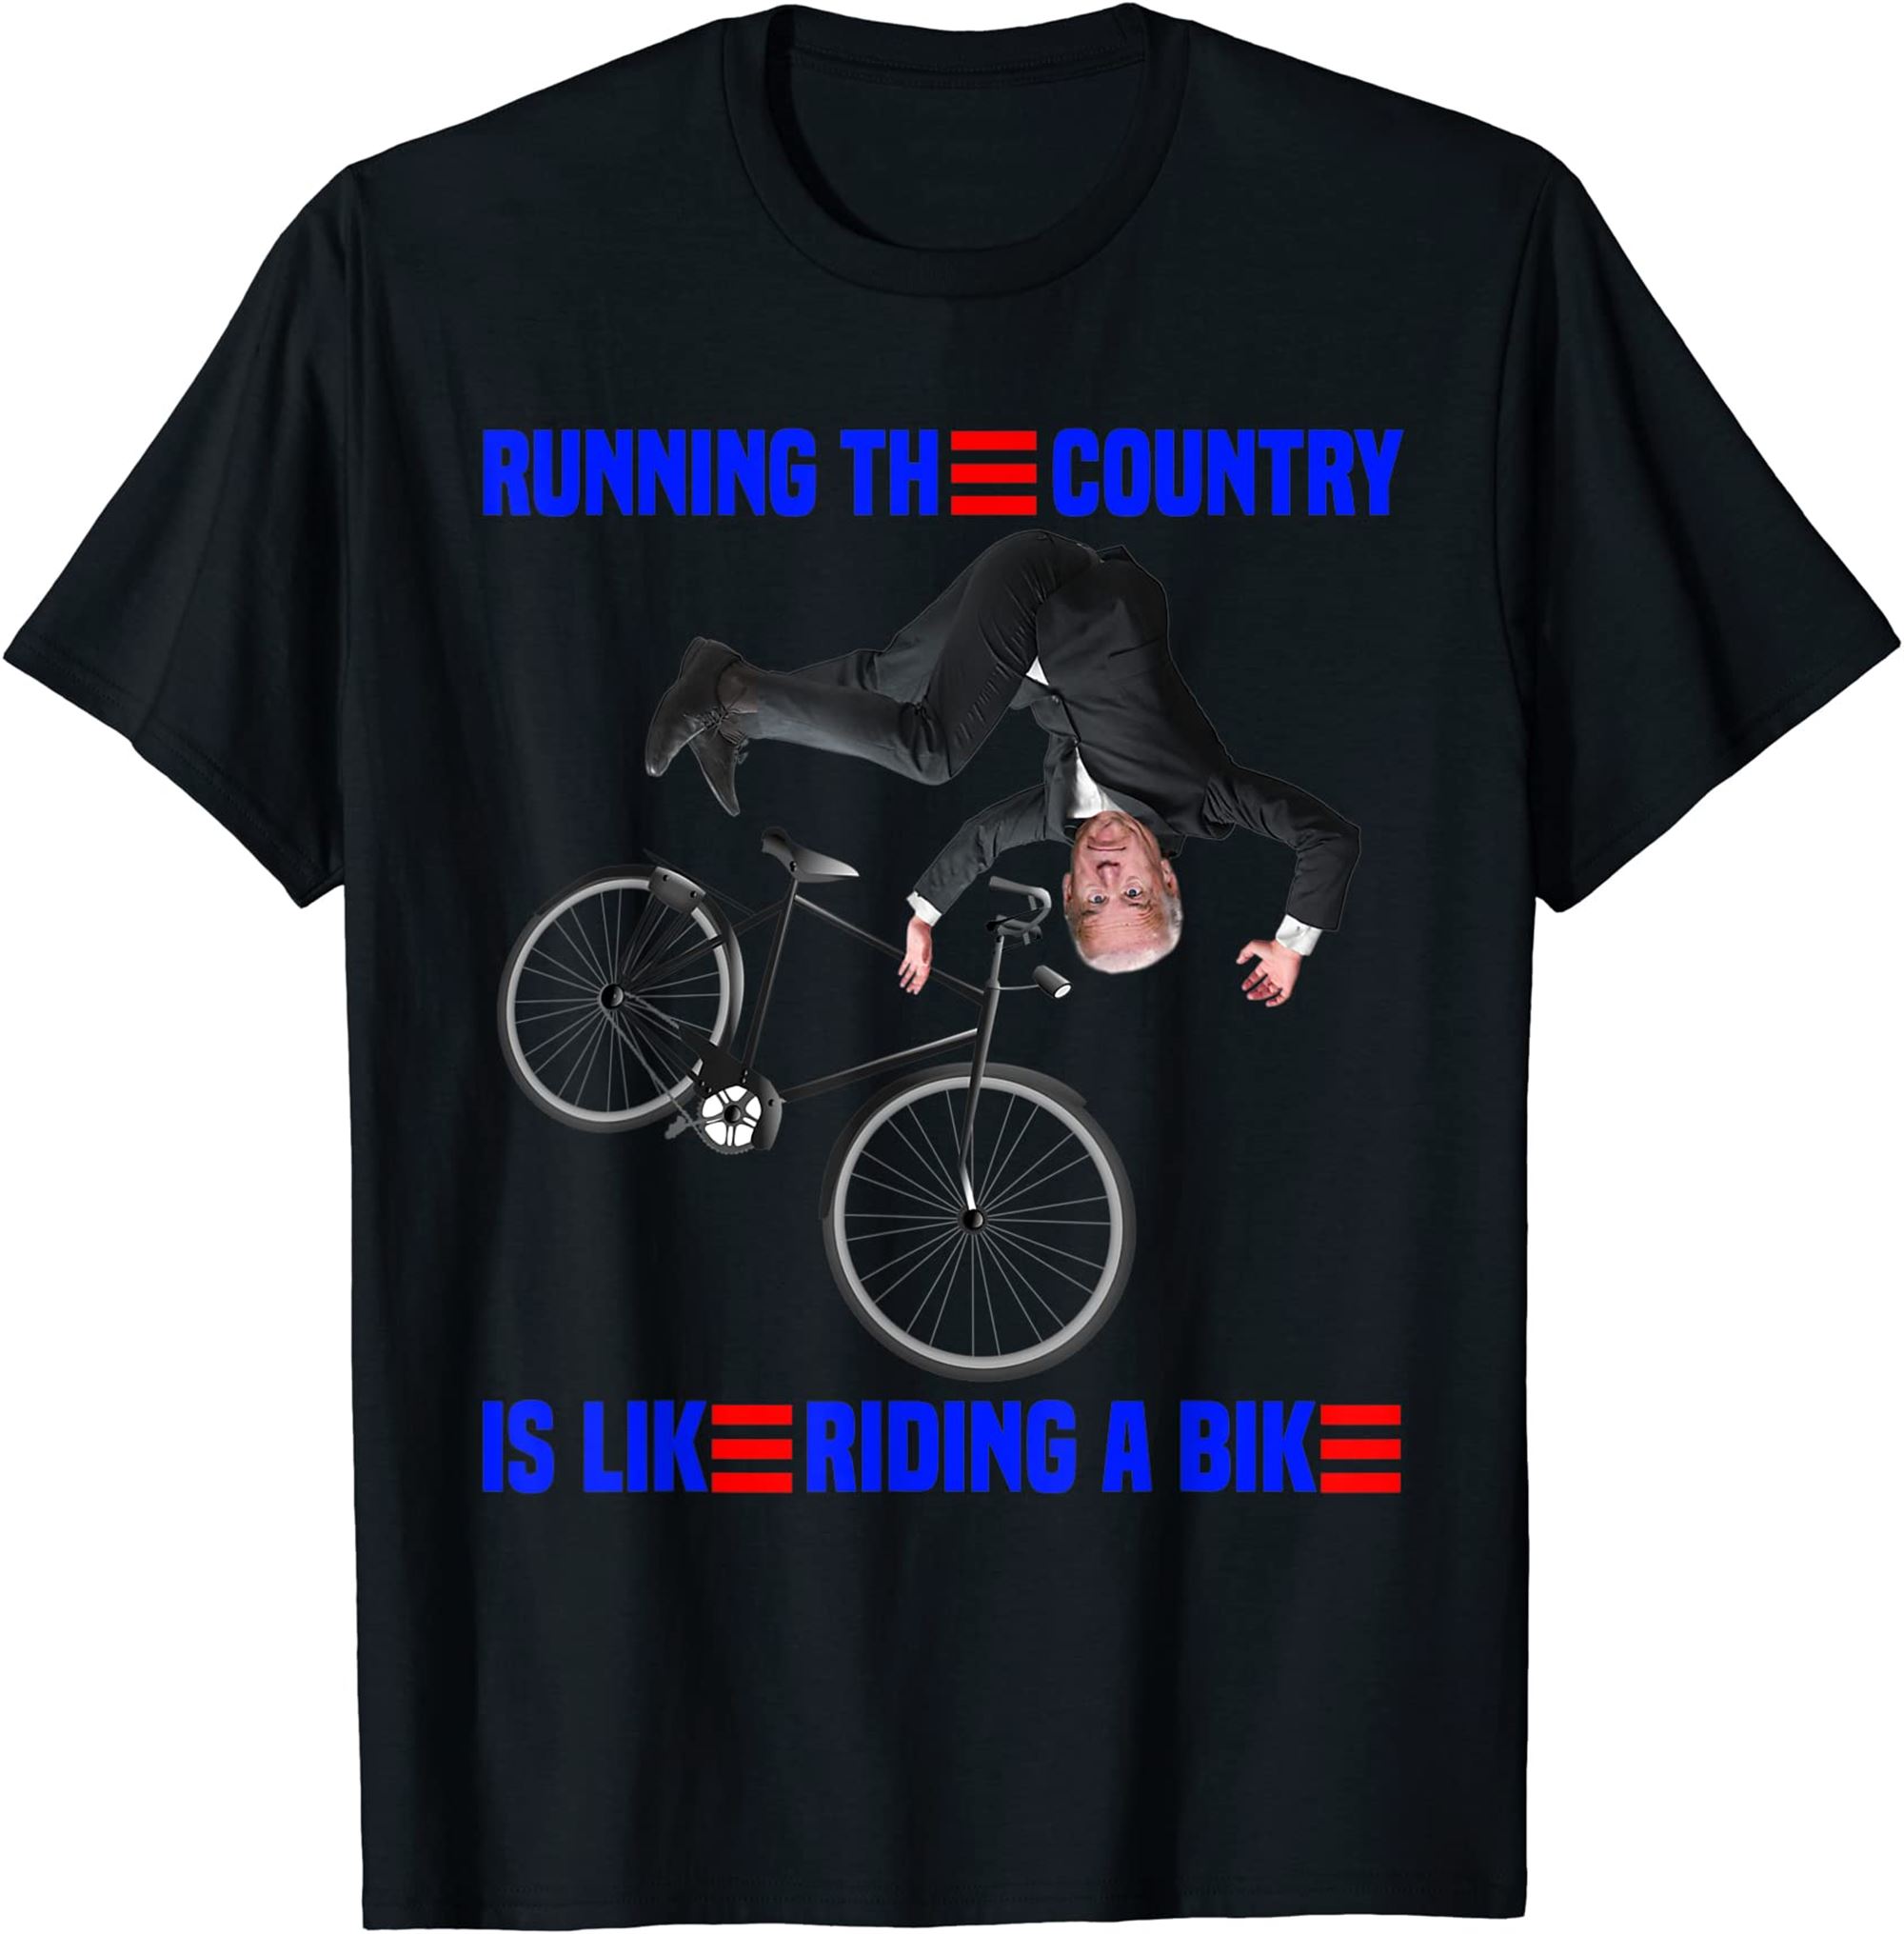 Biden Bike Bicycle Running The Country Is Like Riding A Bike T-shirt Full Size Up To 5xl